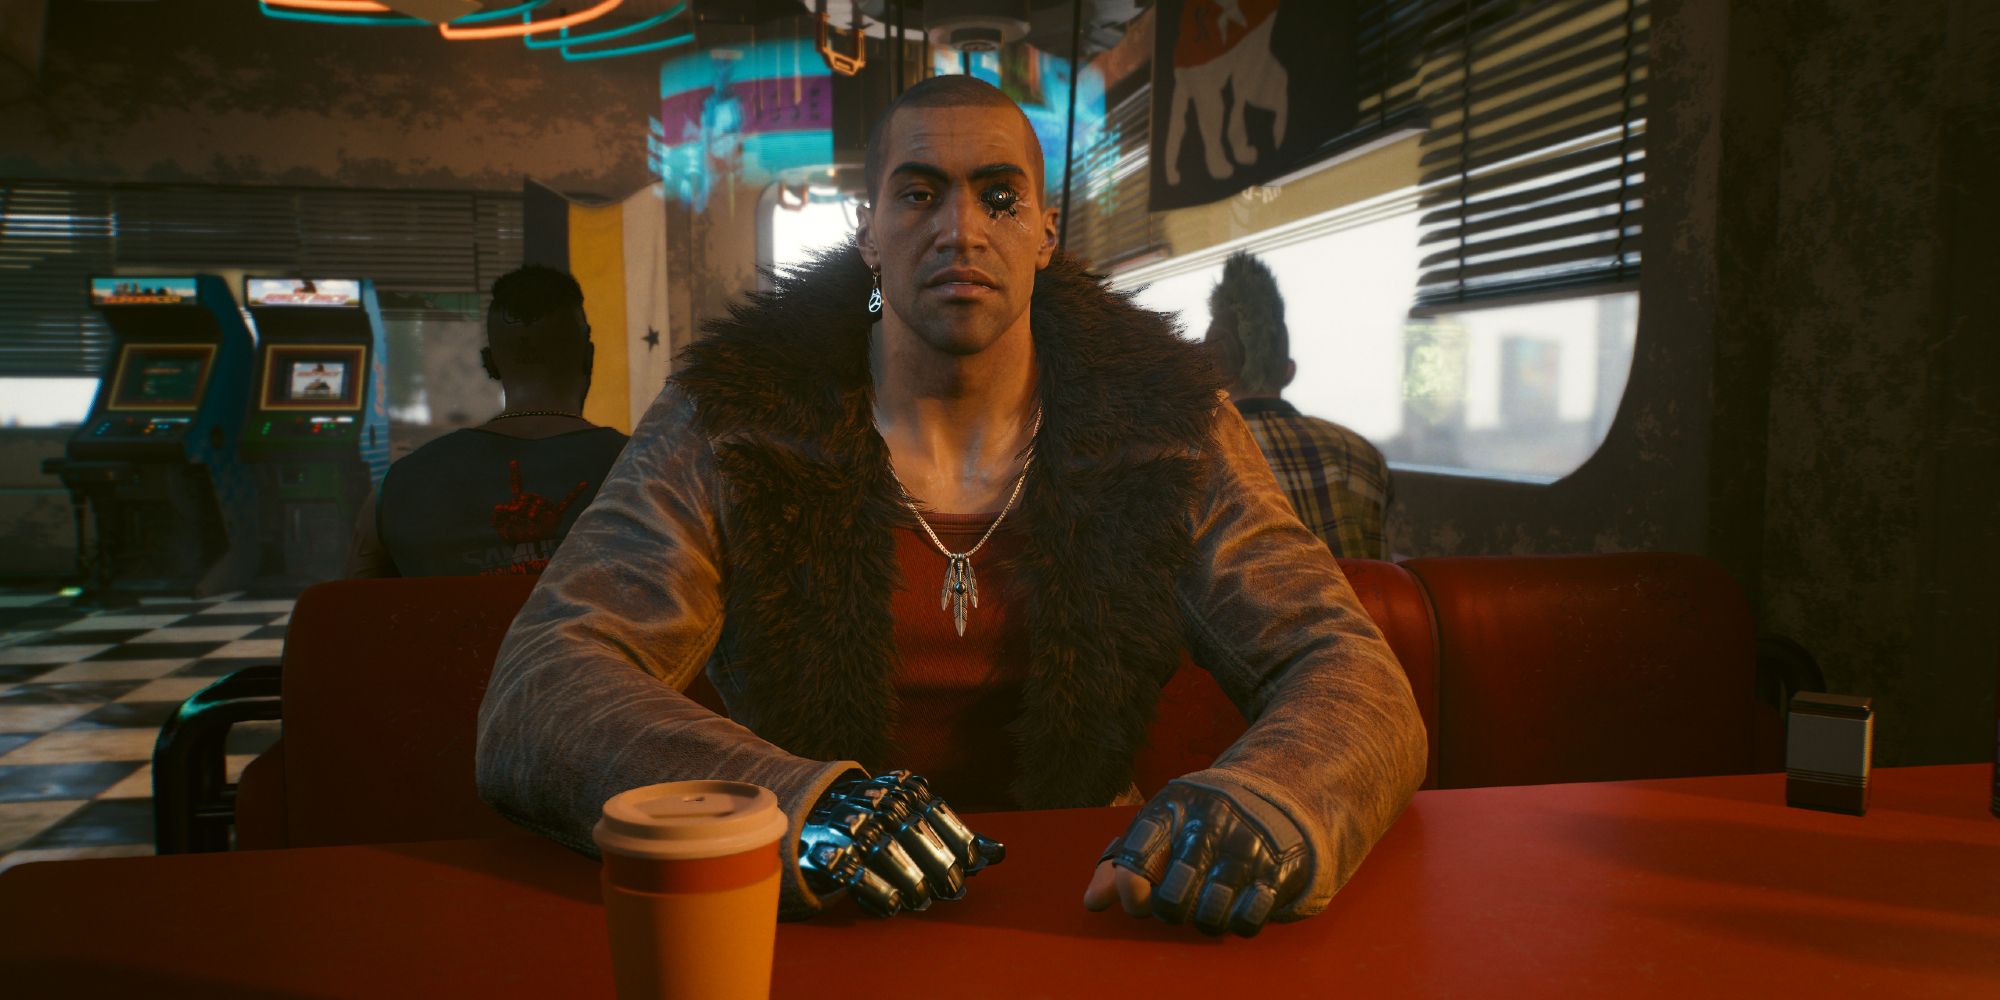 River Ward speaking to V at the Chubby Buffalo's restaurant in Cyberpunk 2077.